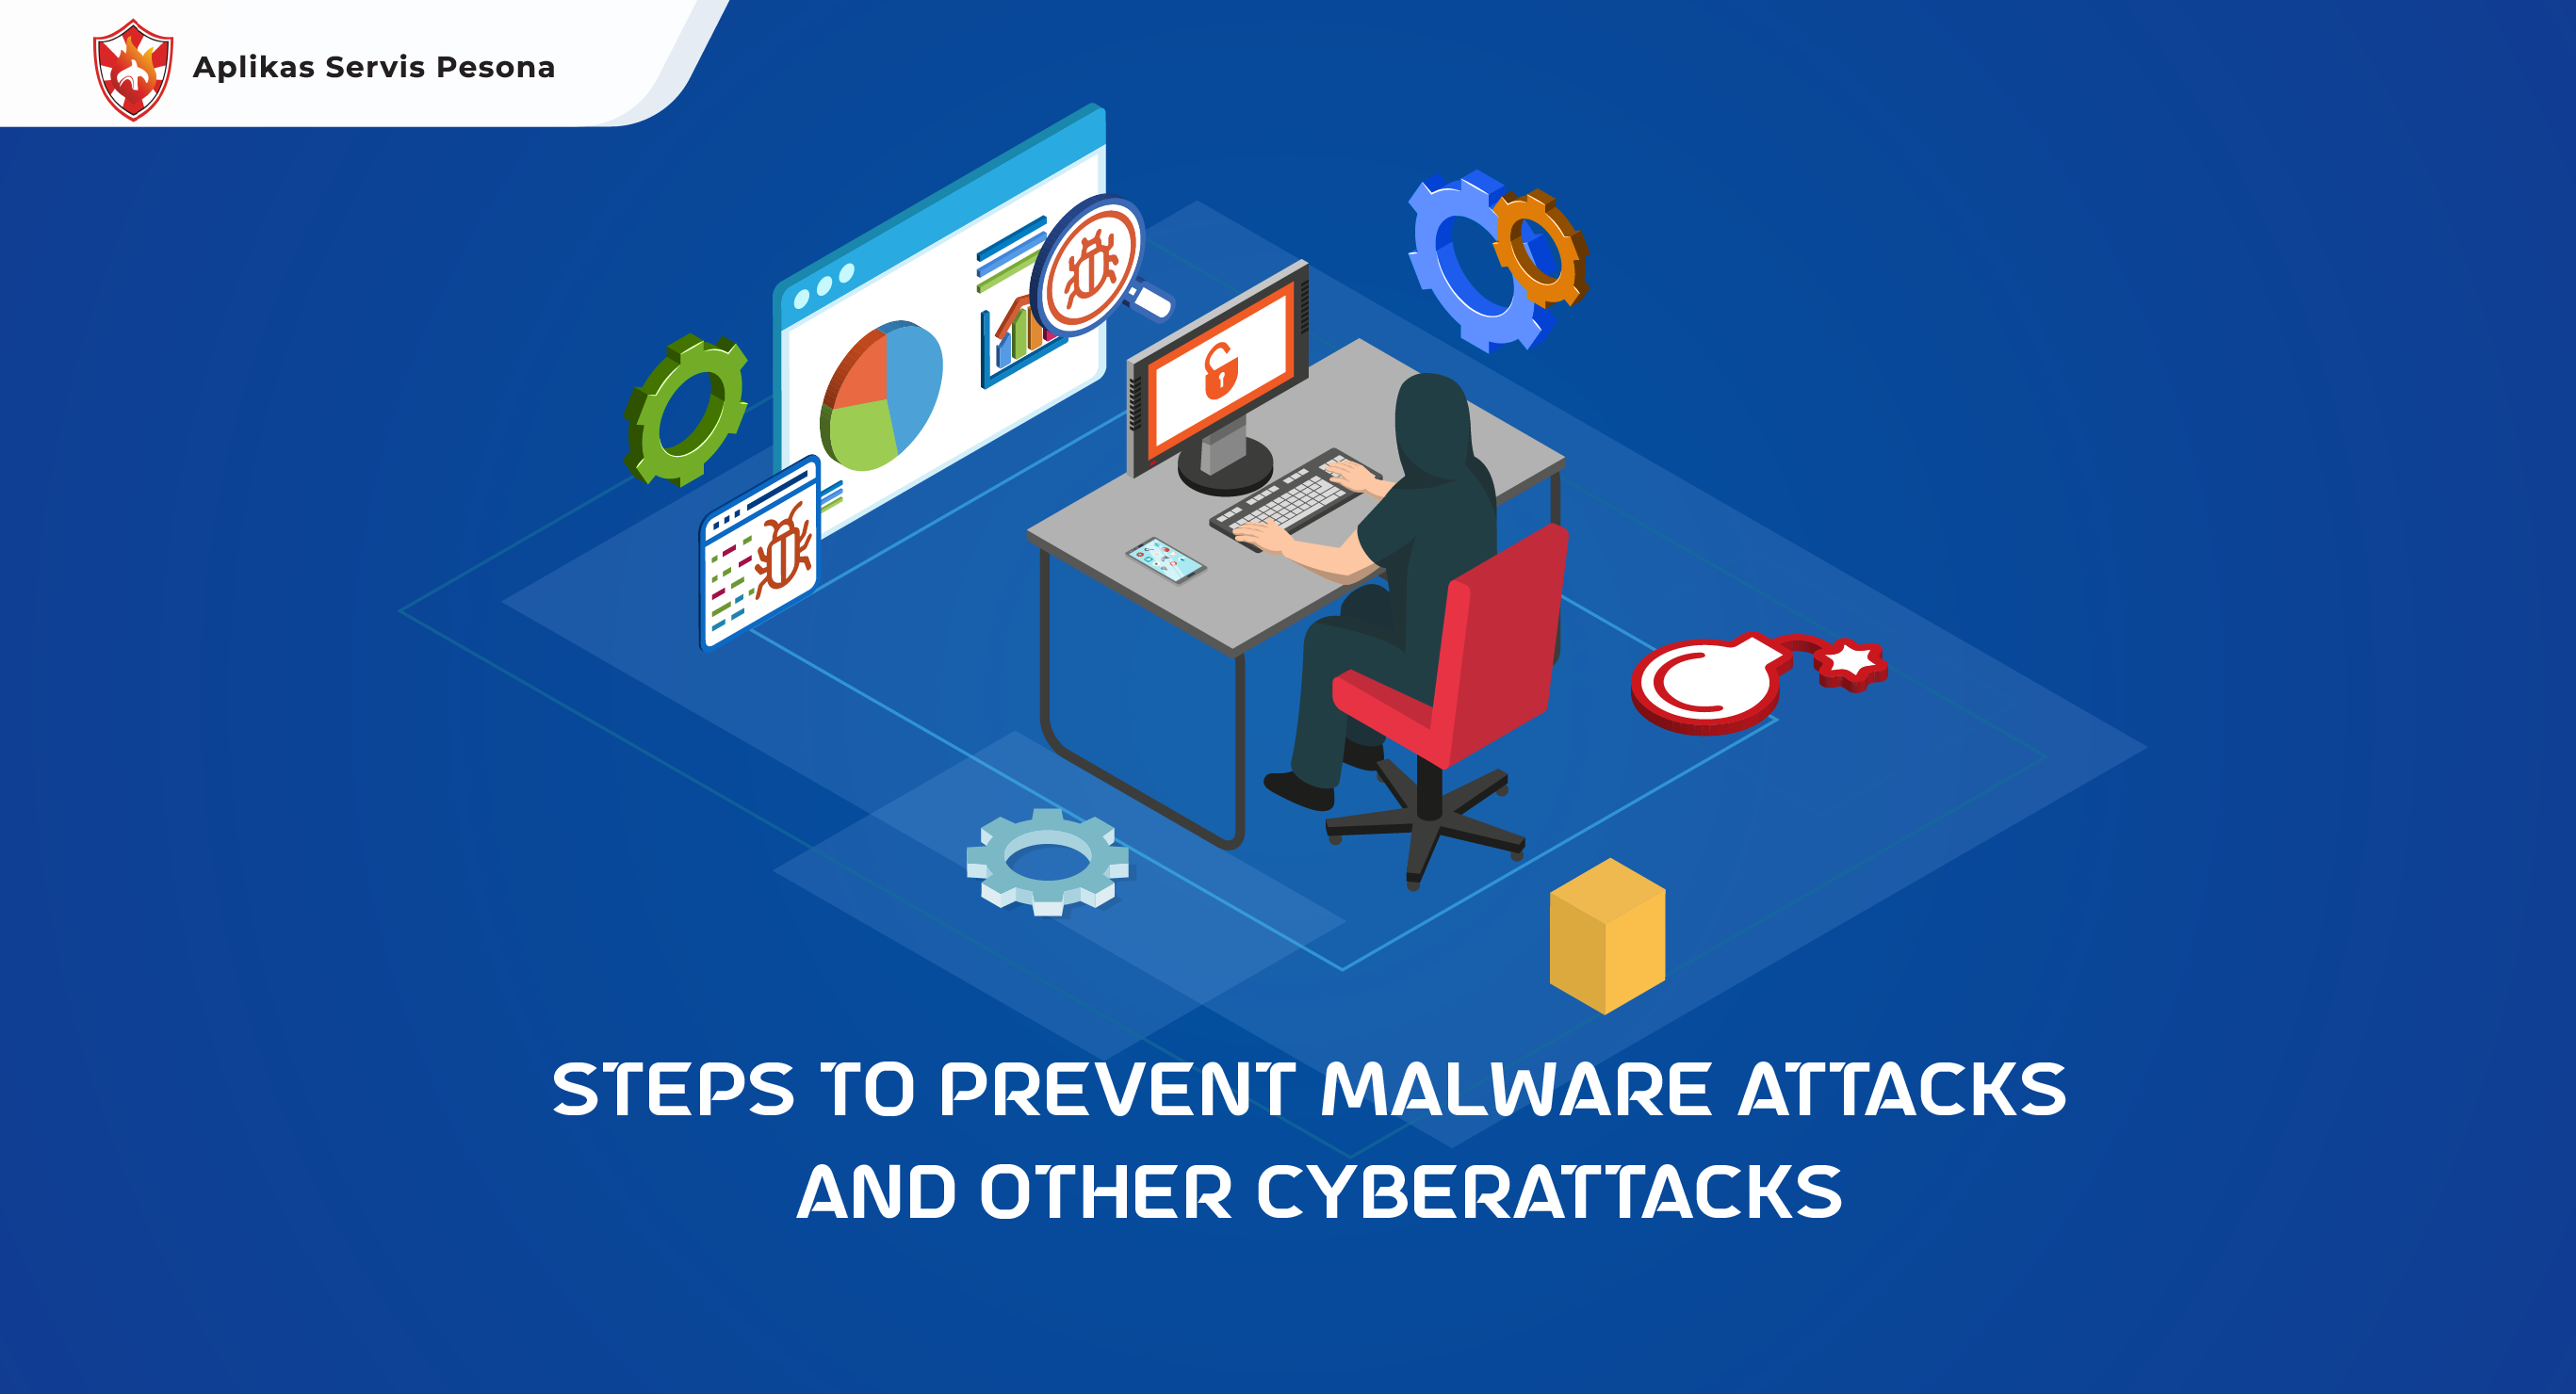 Here are Steps to Prevent Malware Attacks and Other Cyberattacks